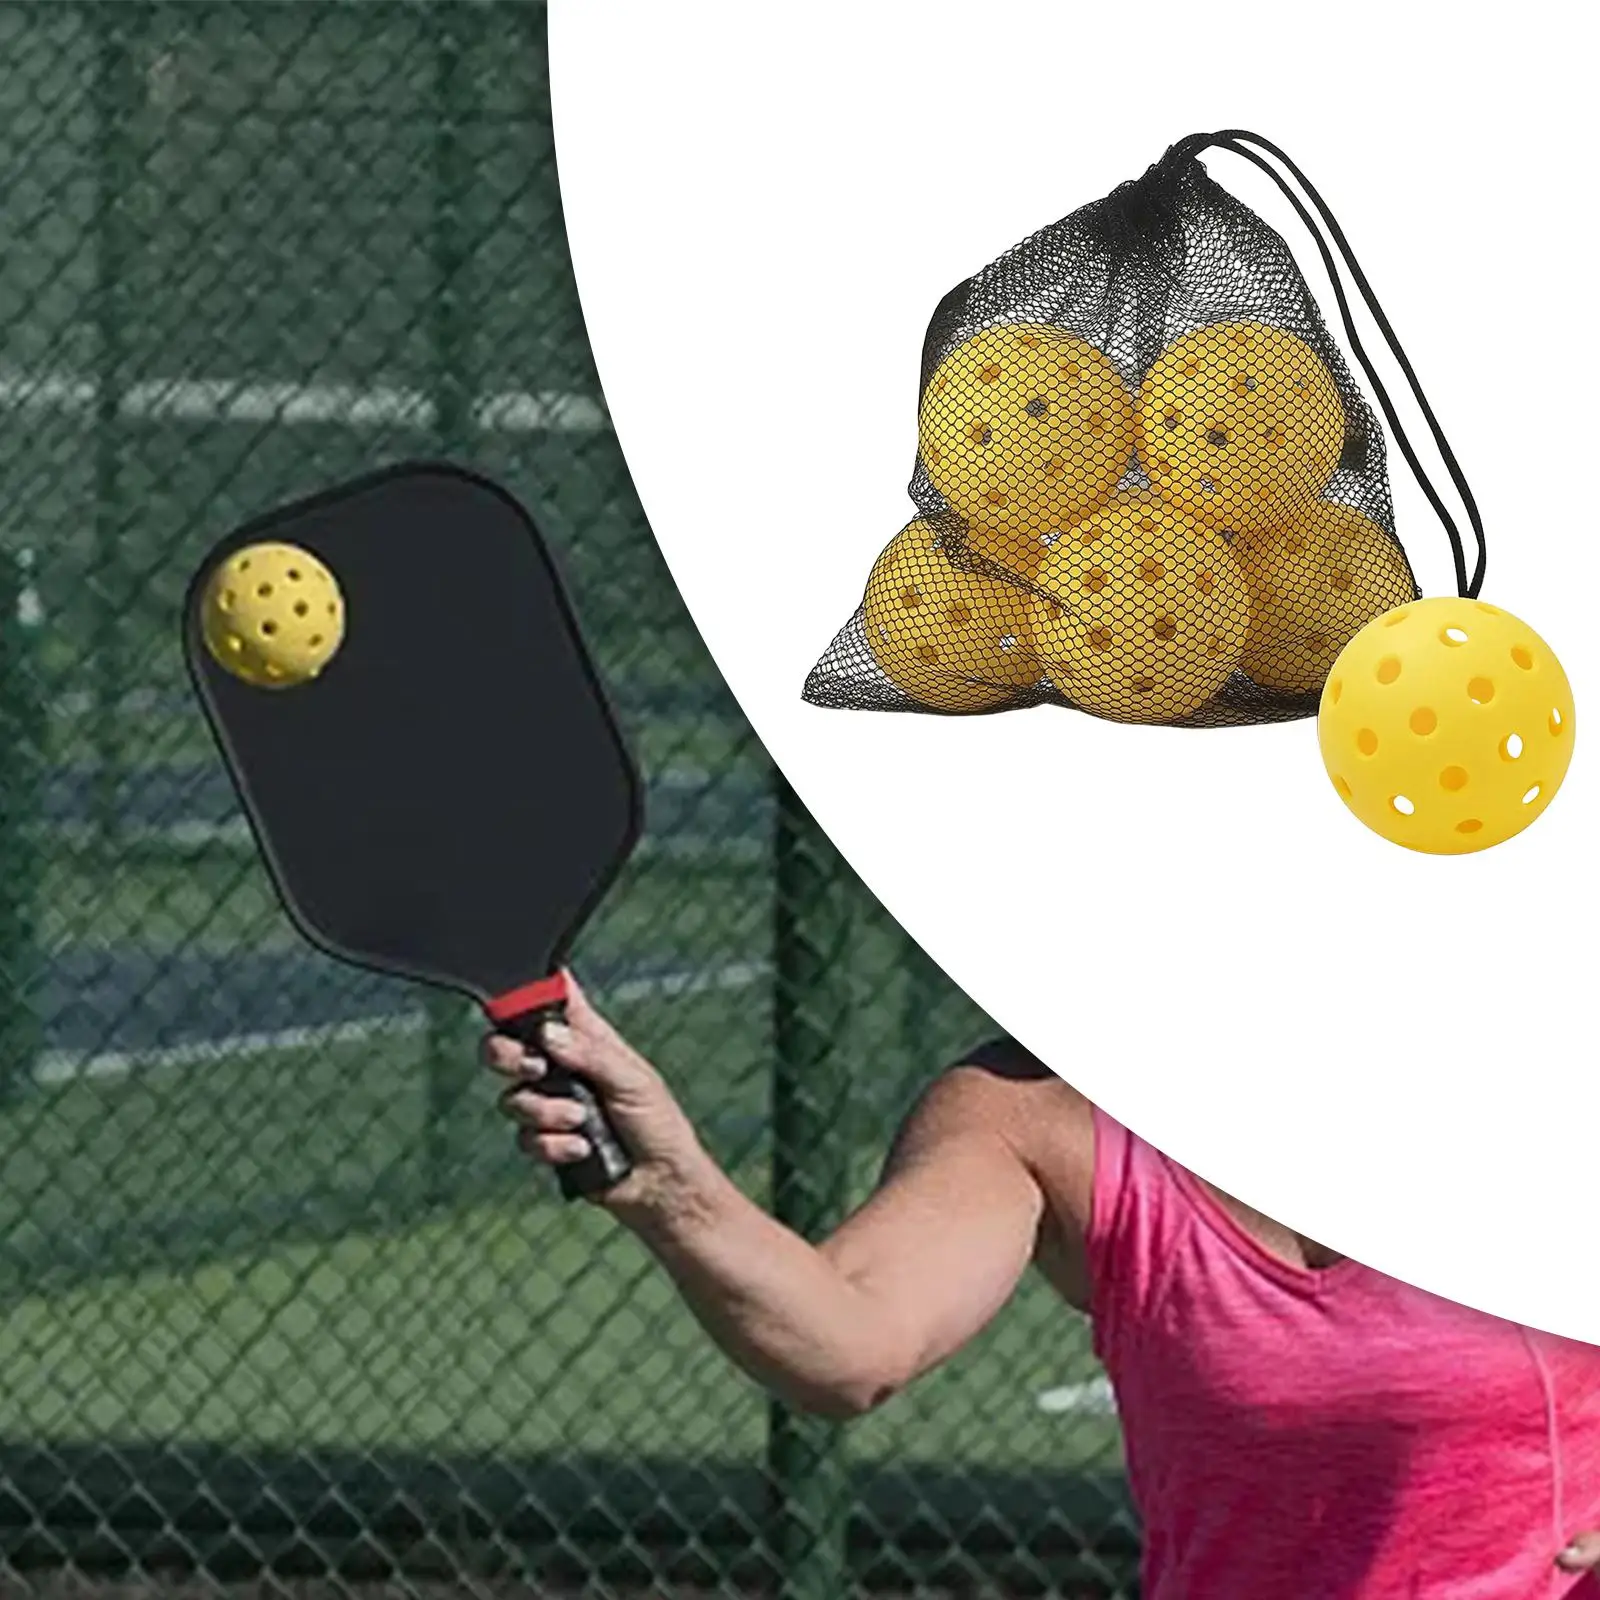 6 Pieces Pickleball Balls Sports Pickle Balls for Professional Perfomance